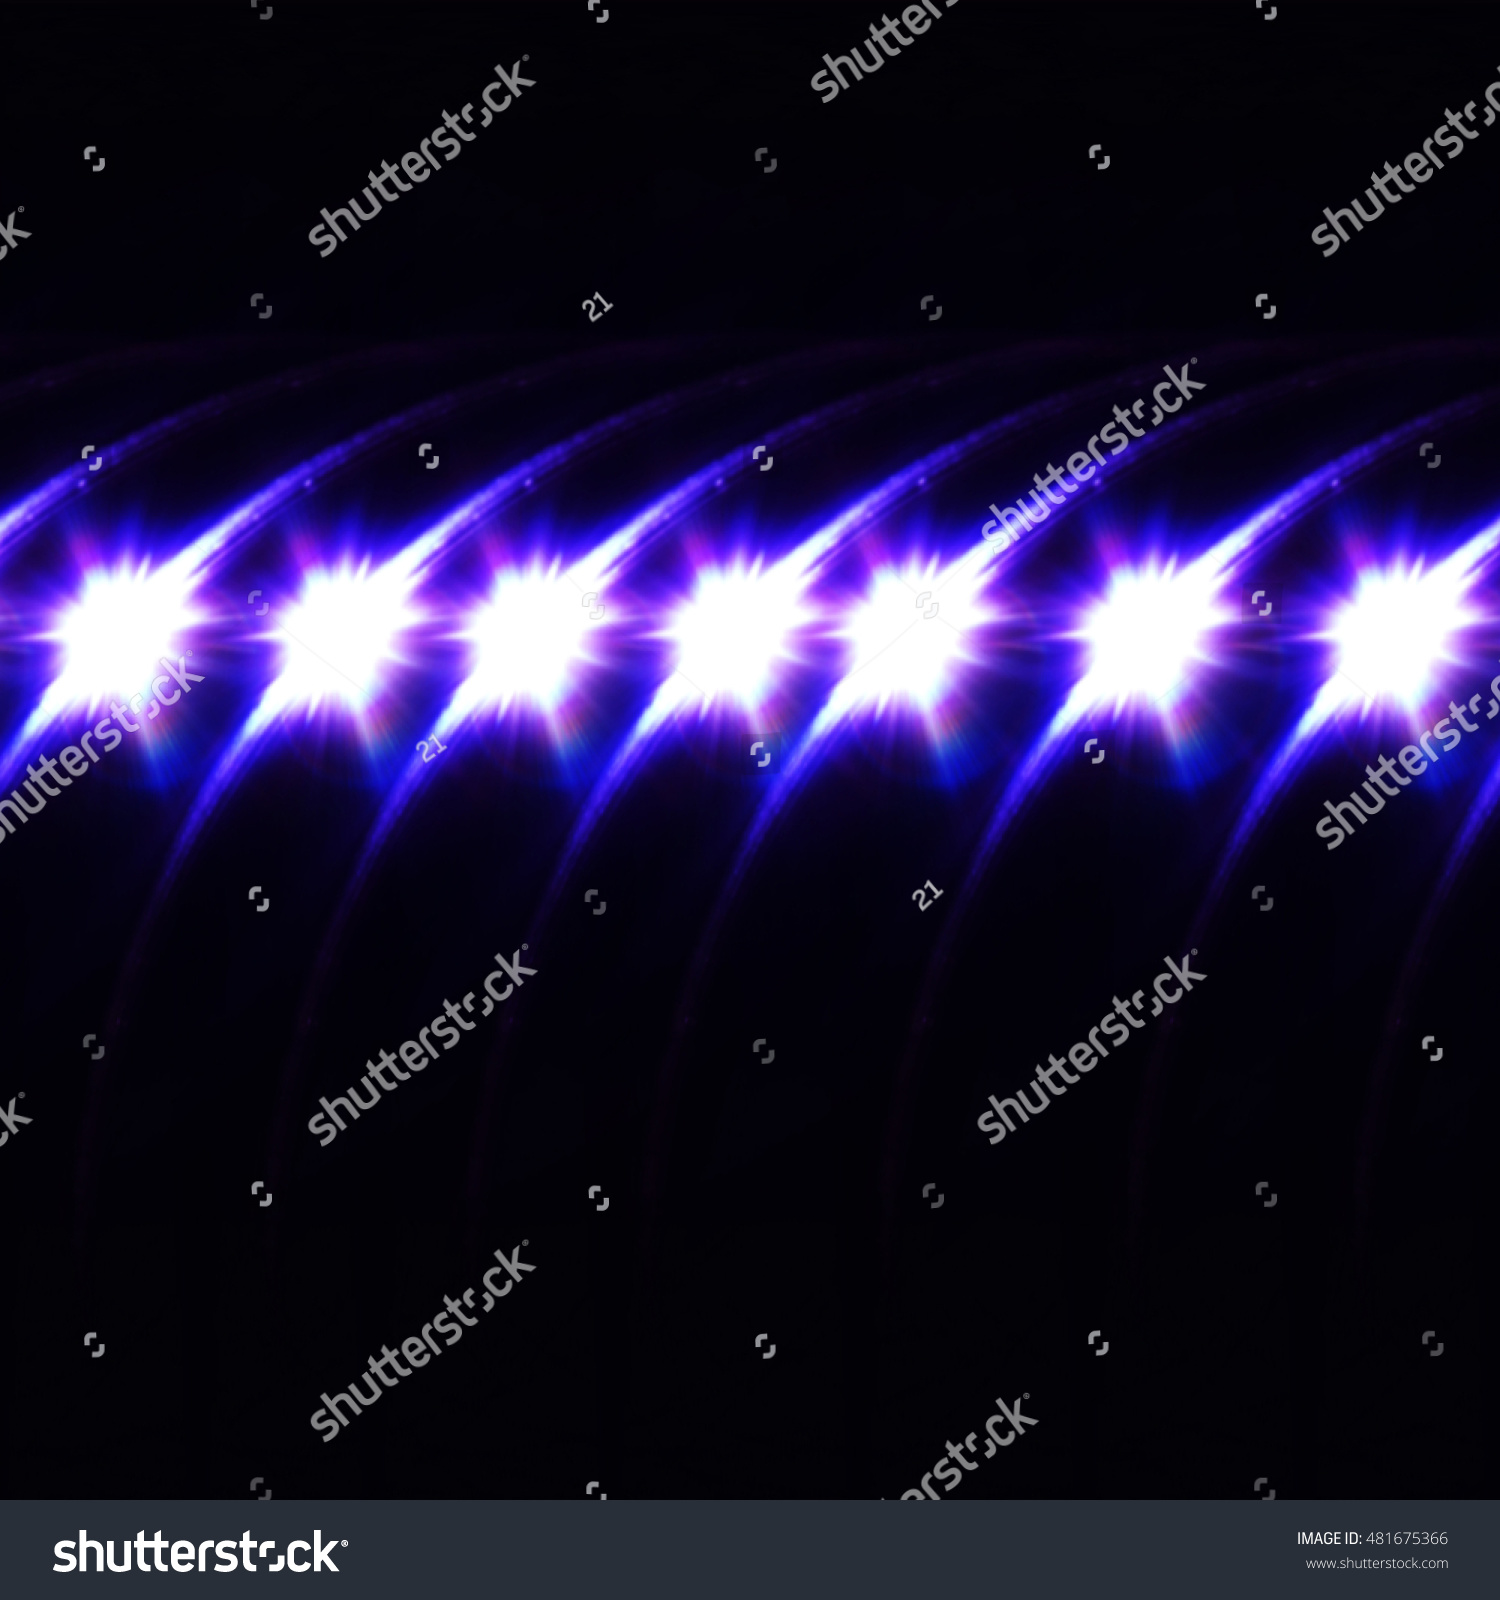 Abstract image of lighting flare #481675366